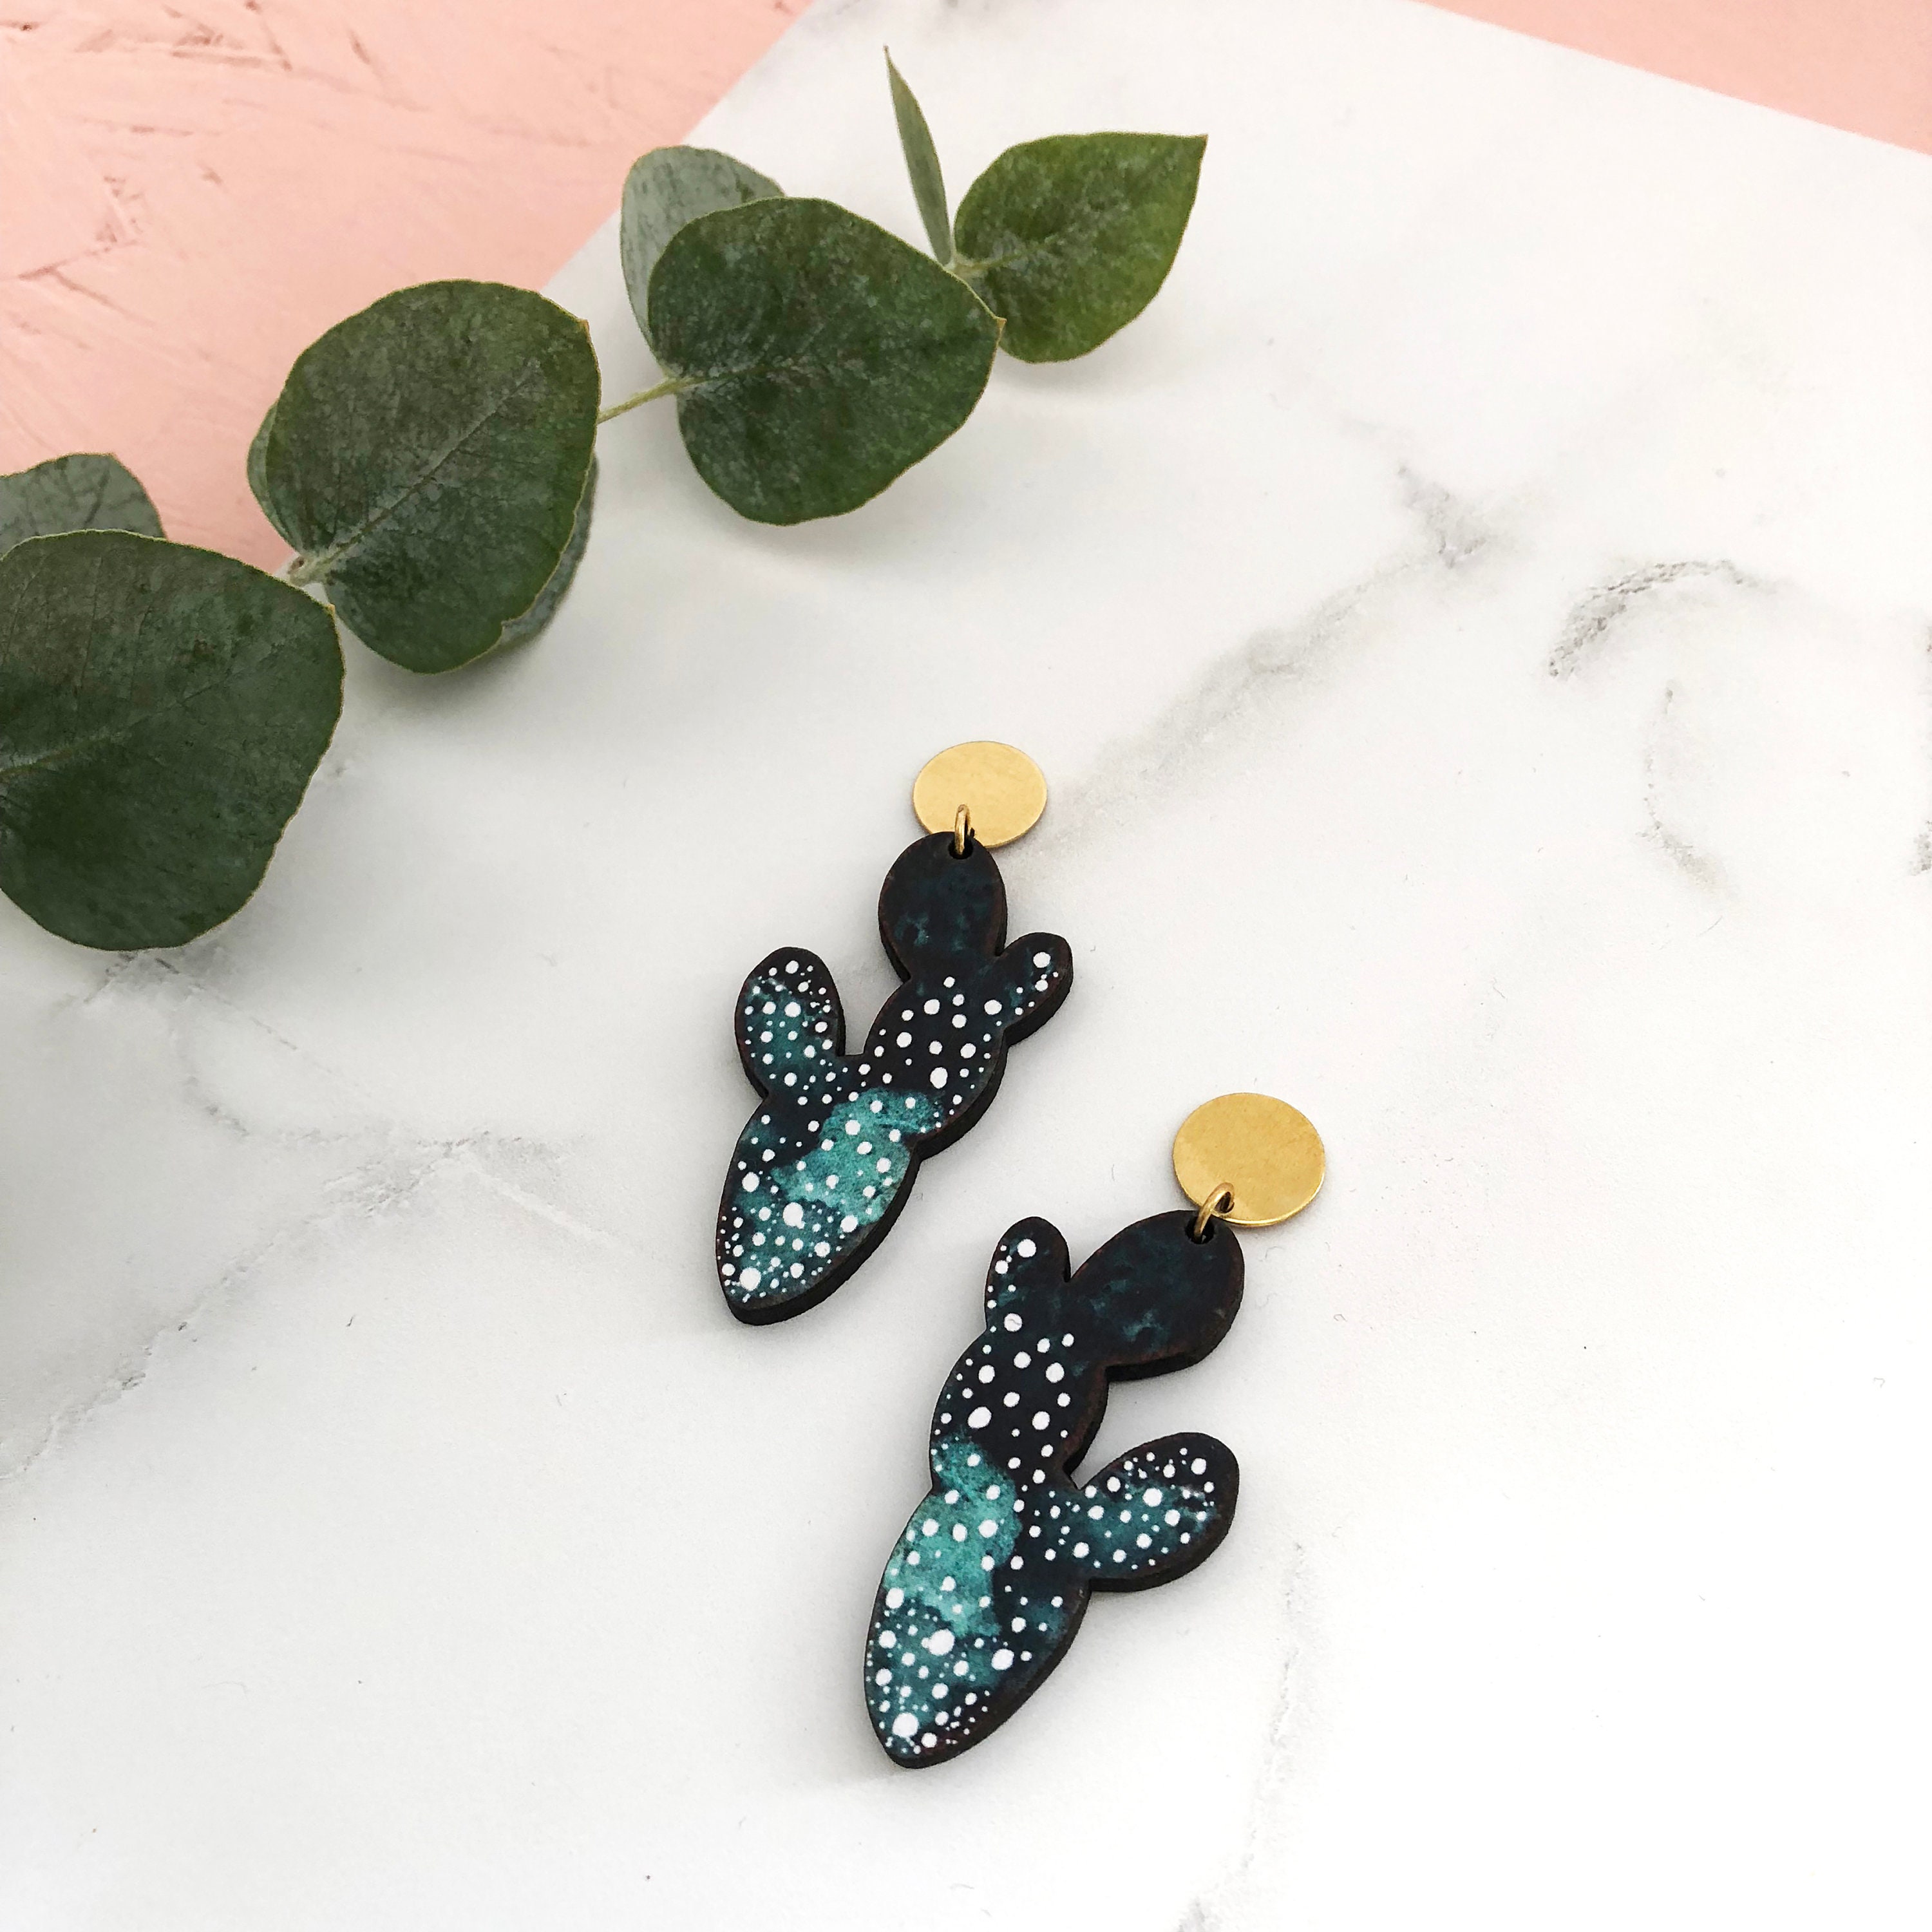 statement Cactus Earrings - Jewellery Tropical House Plant Gift Fashion Accessory